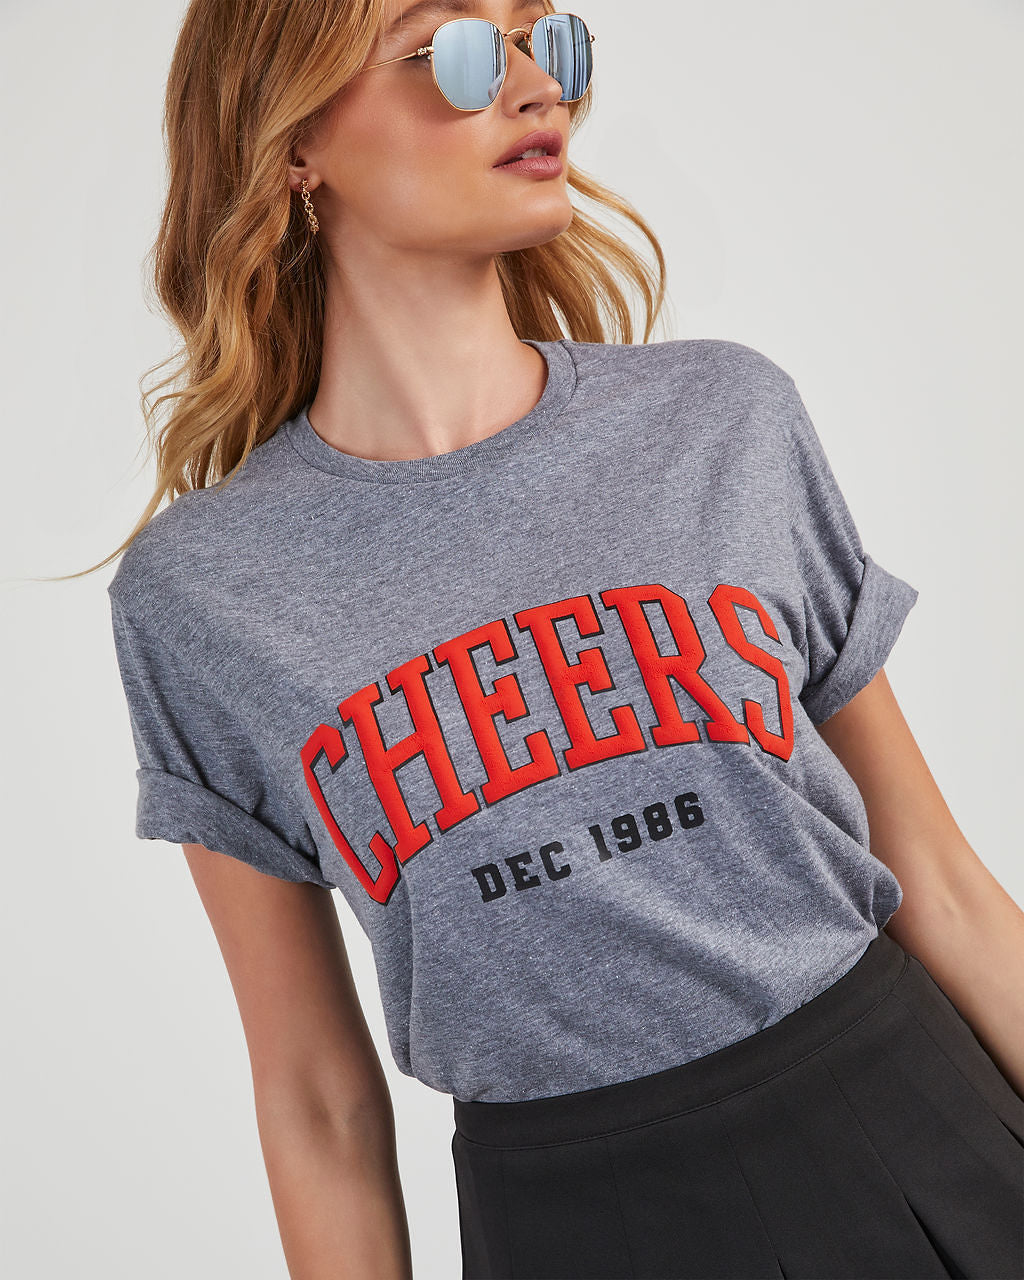 Cheers Cotton Graphic Tee – VICI